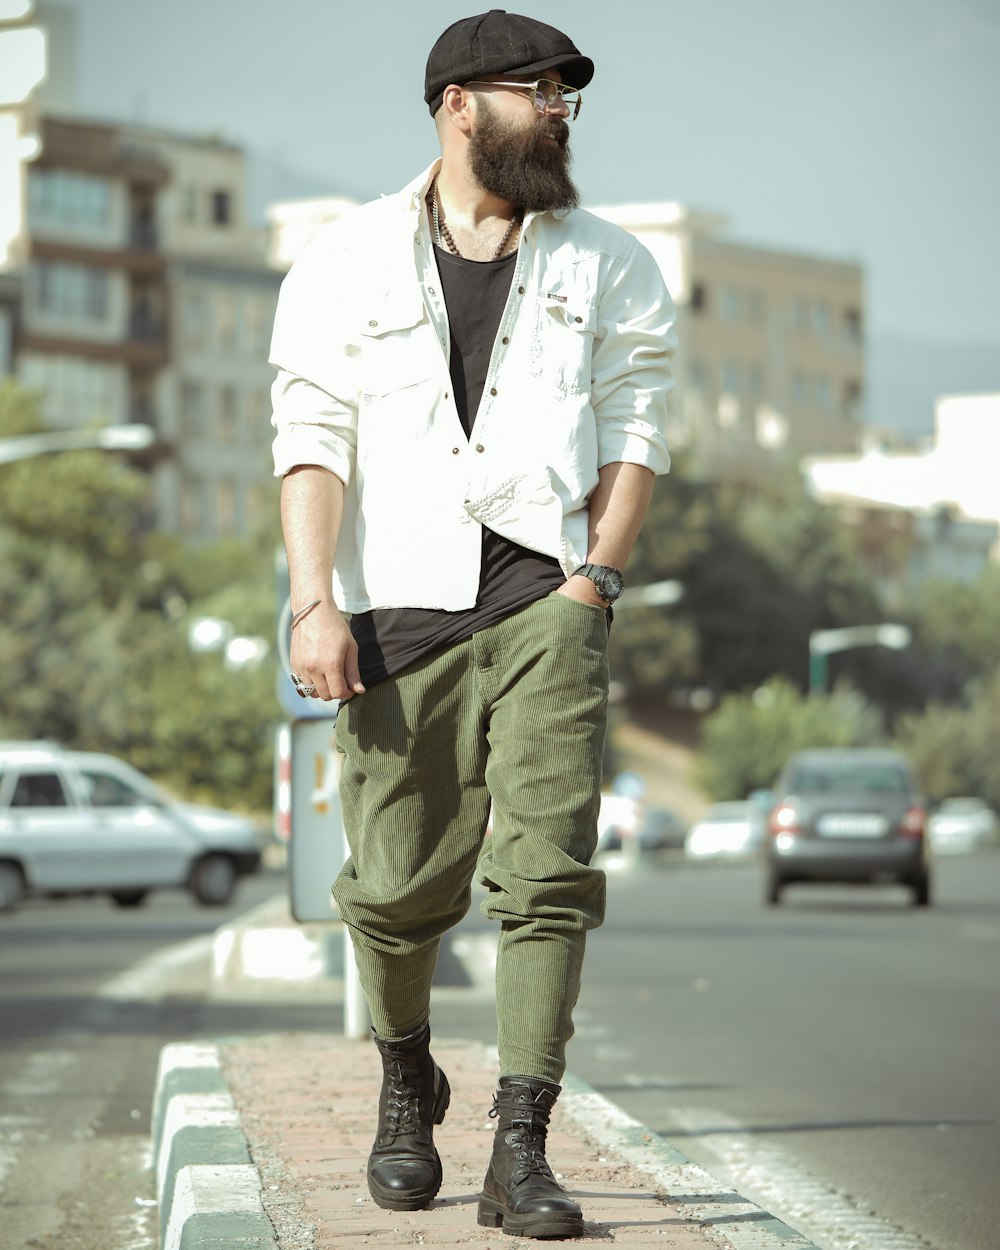 man in white button up shirt and green pants standing on road during daytime